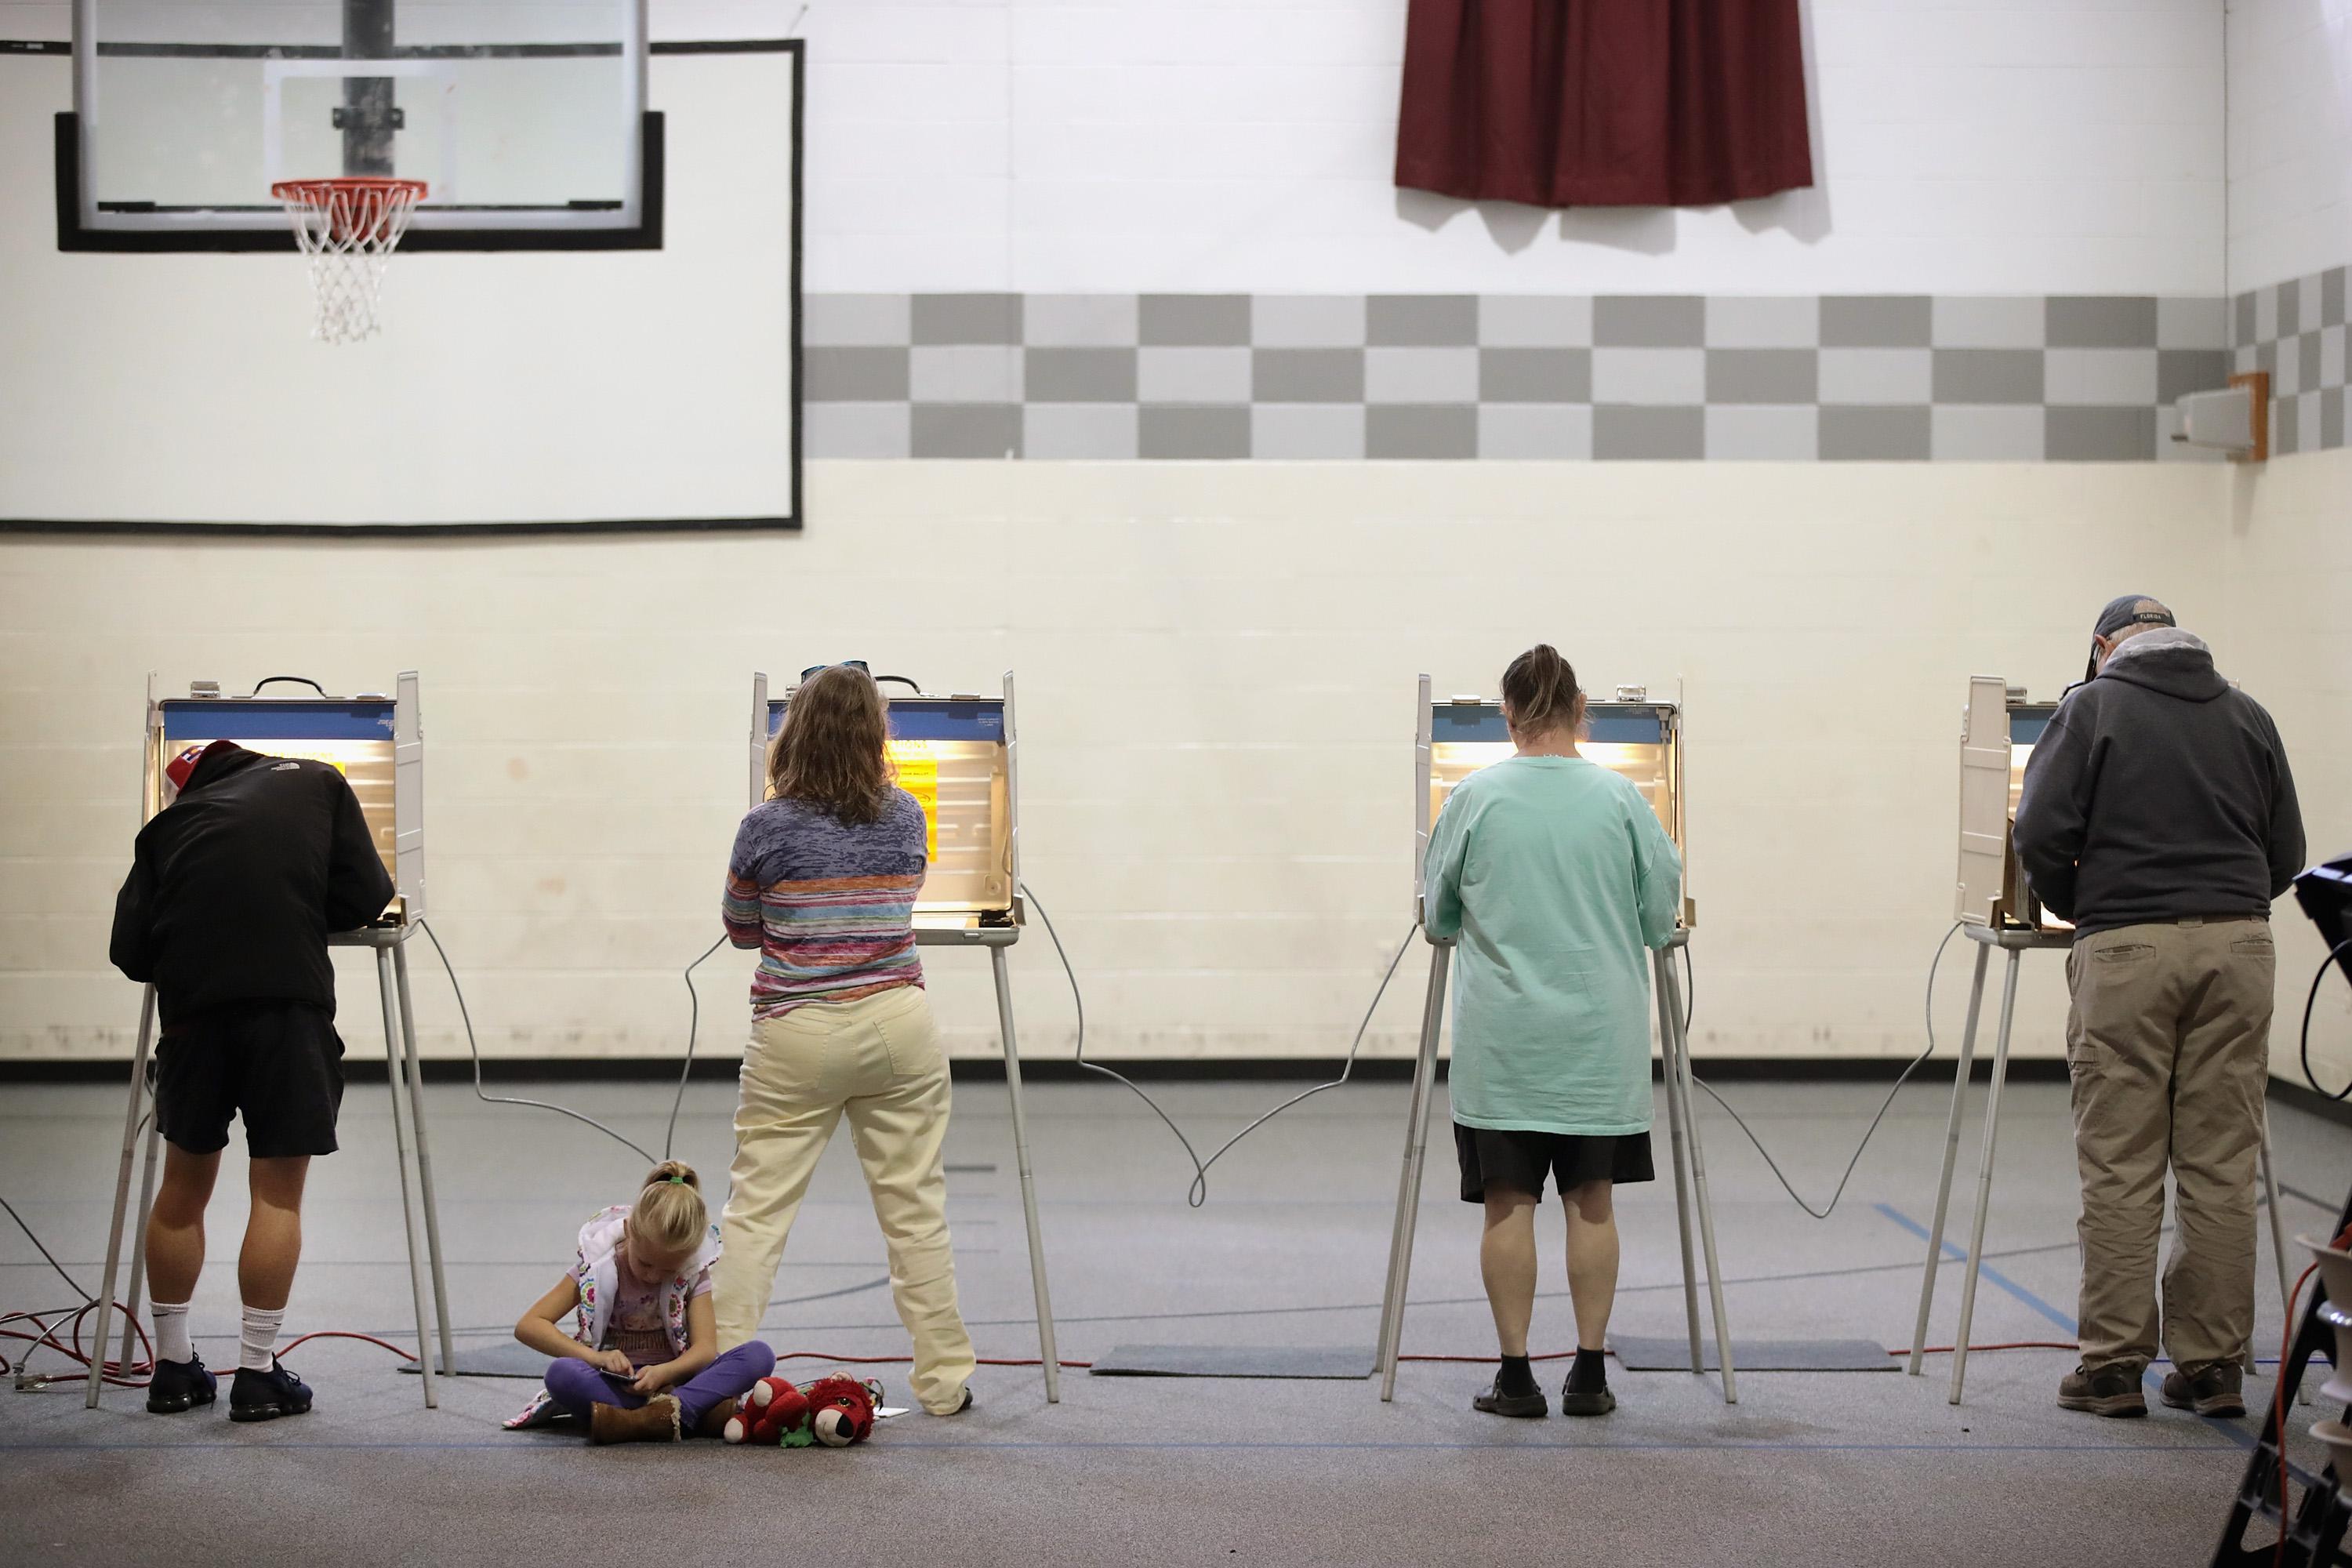 Four people fill out ballots at voting booths in a gymnasium.